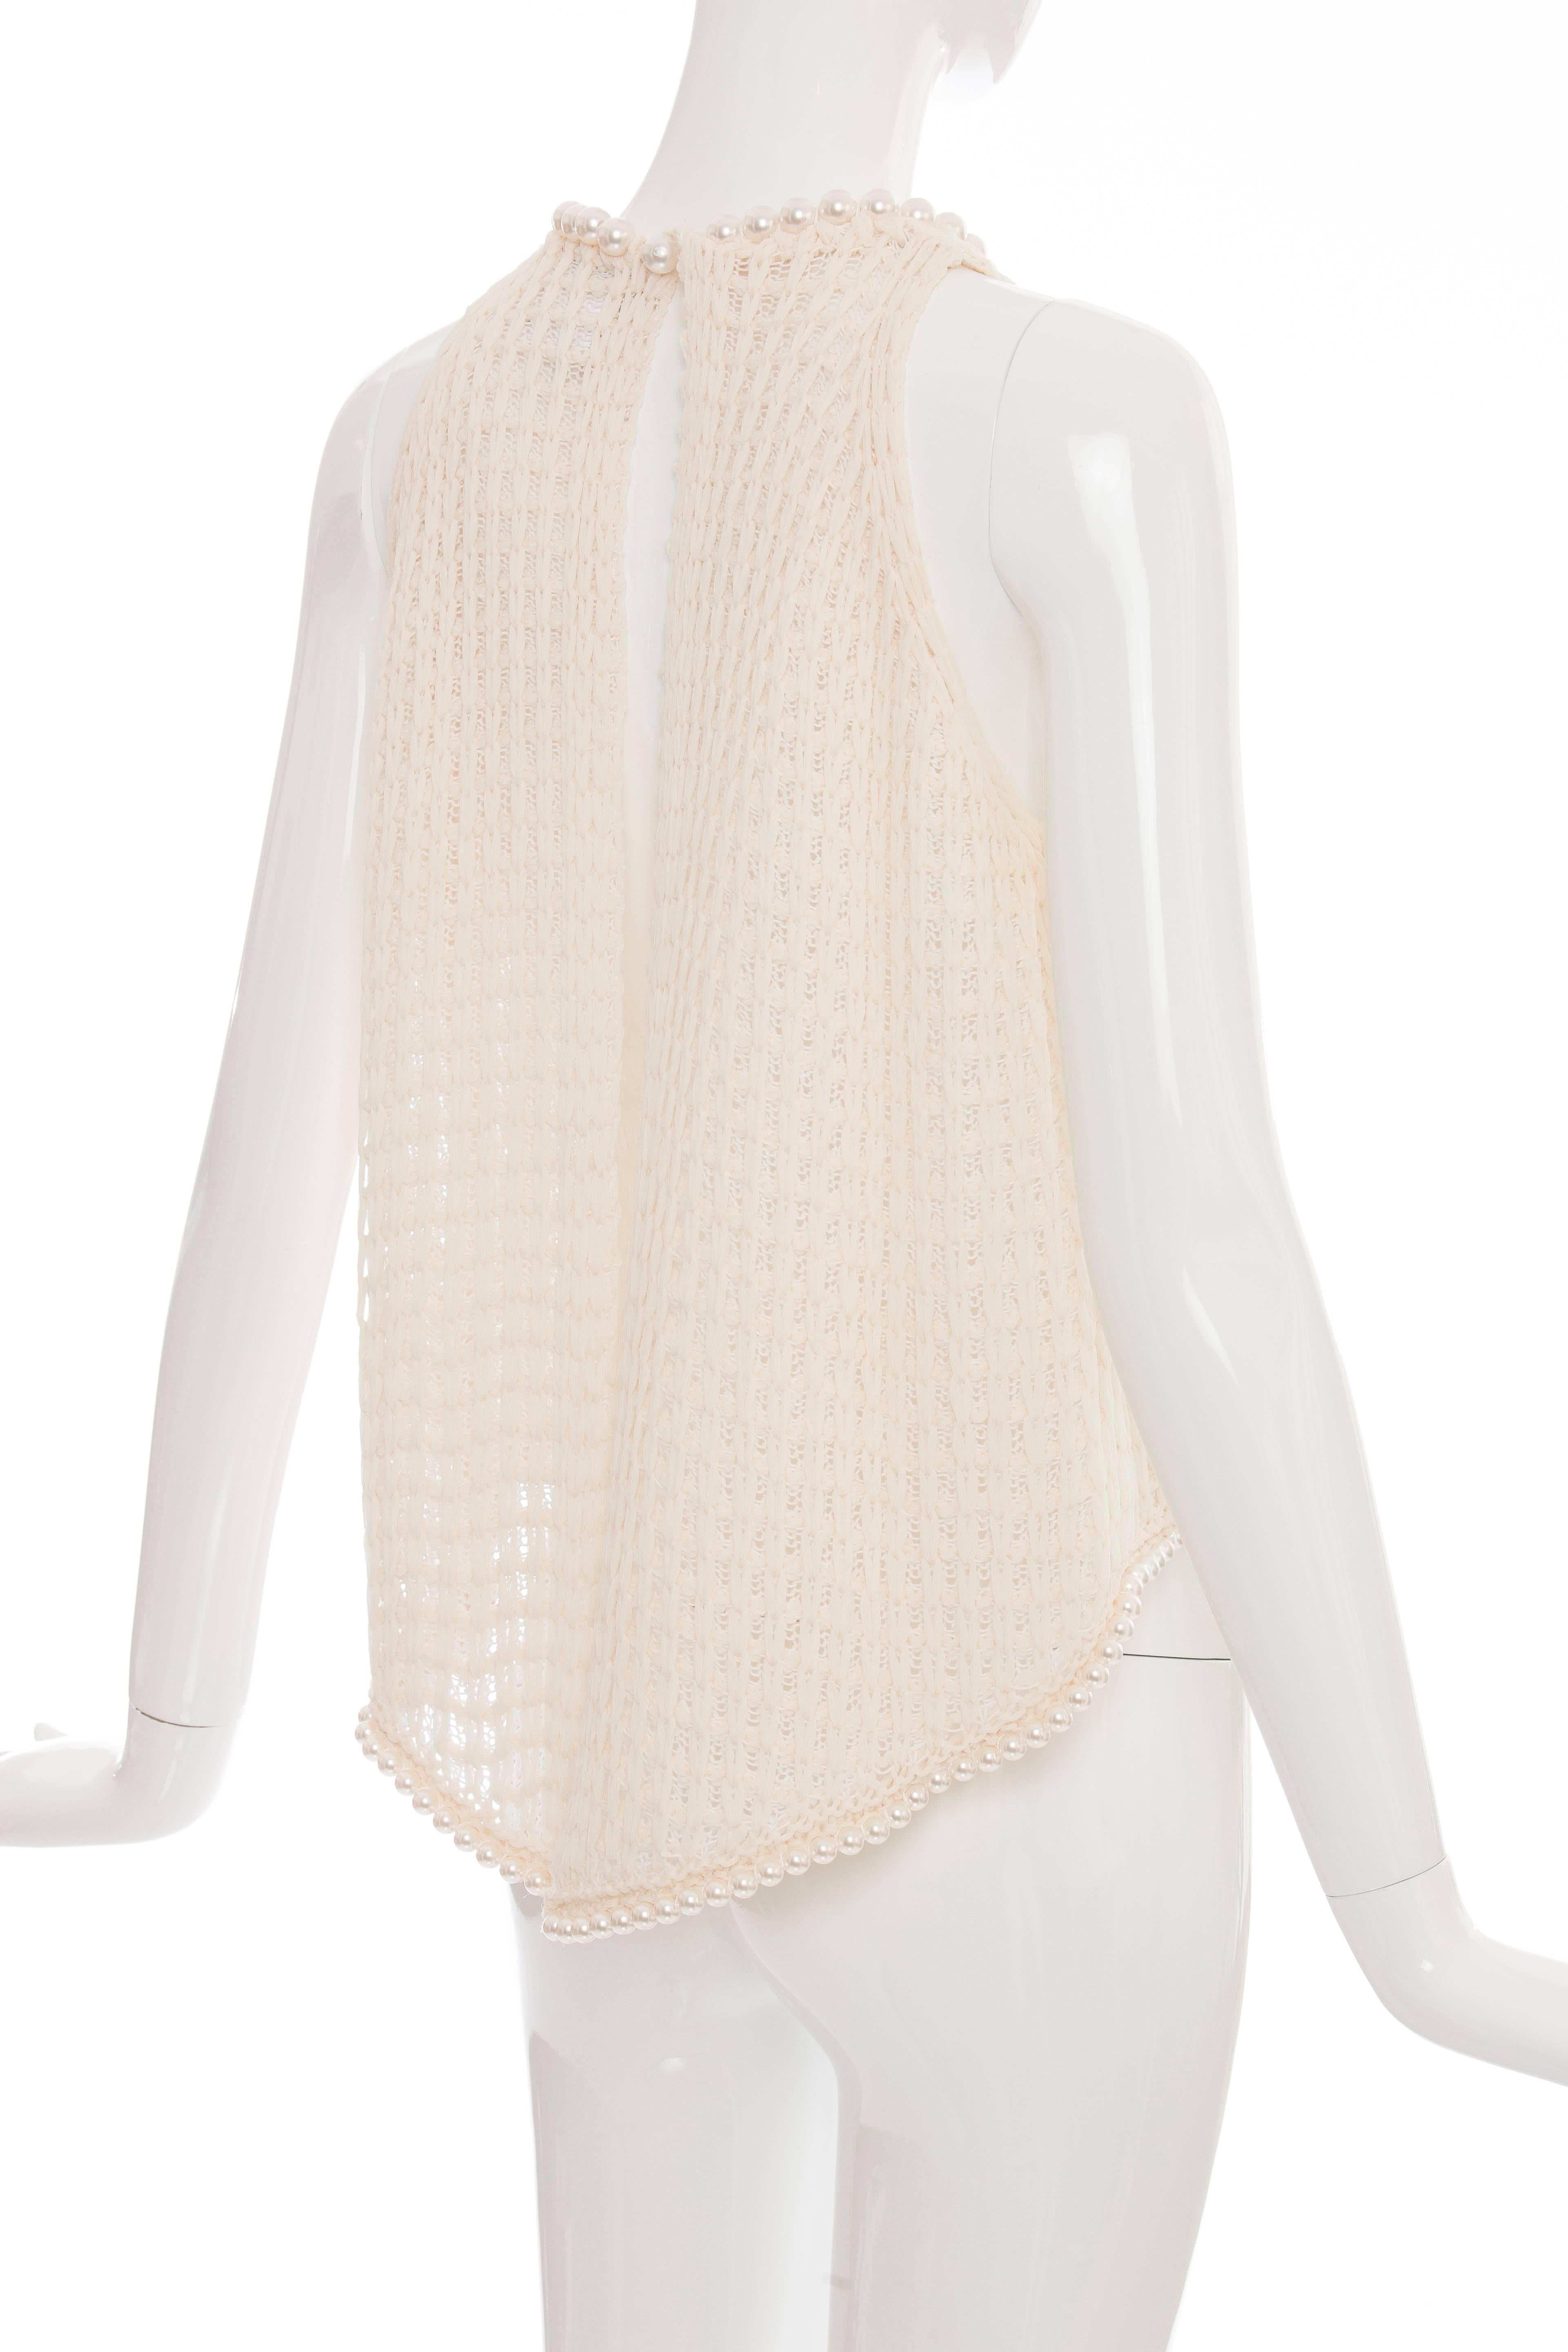 Women's Chanel Cream Silk Blend Open Knit Top With Pearl Embellishments, Spring 2009